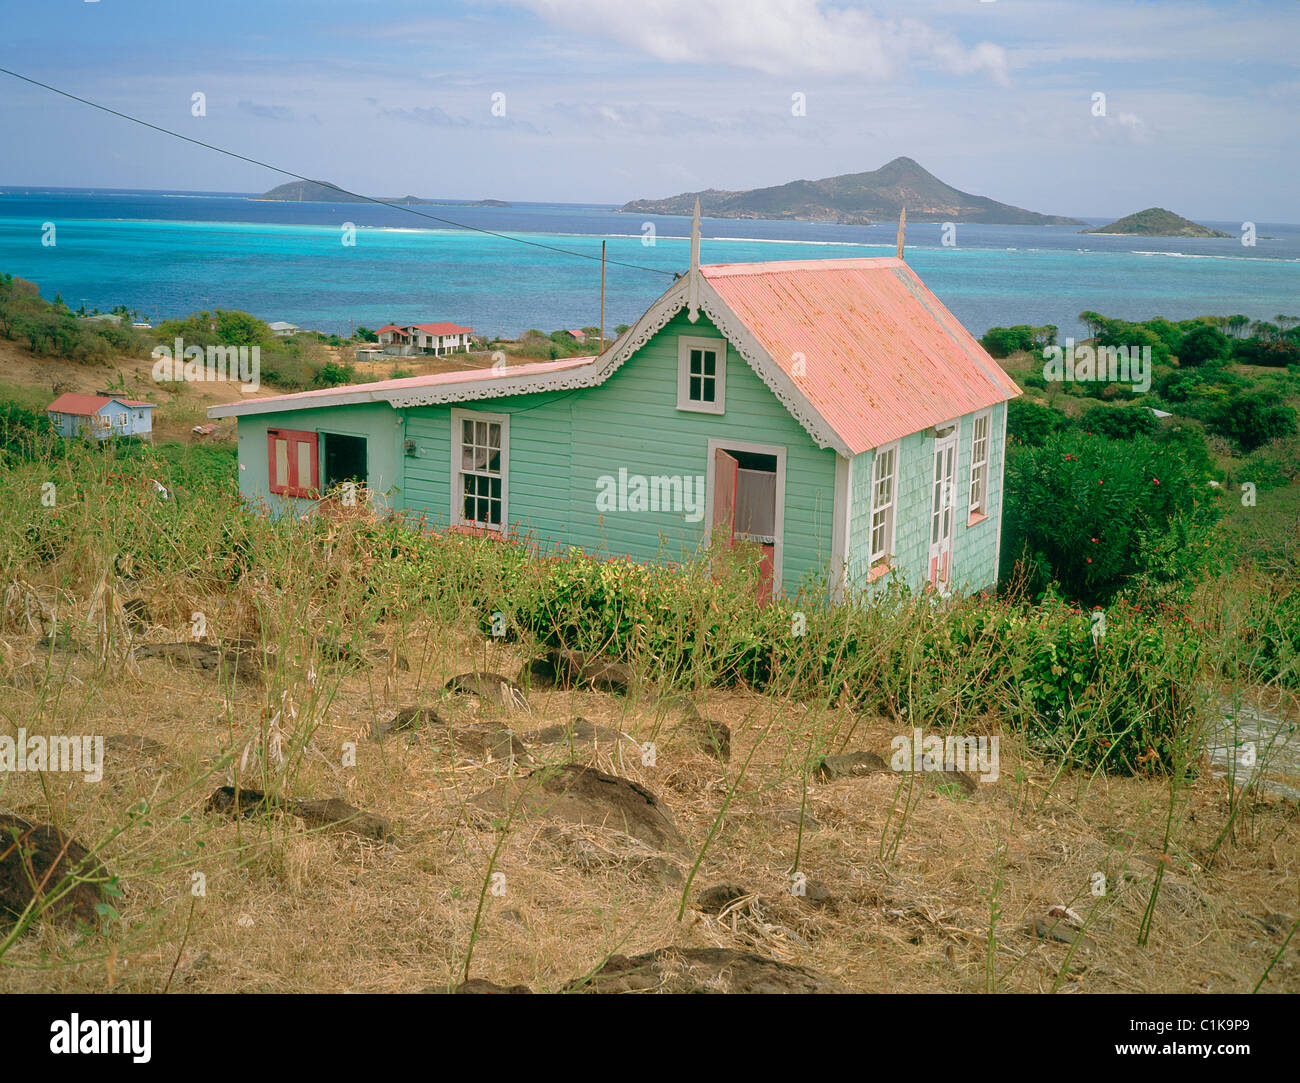 Grenada Island, Carriacou, Local house in front of Petit-Martinique ...